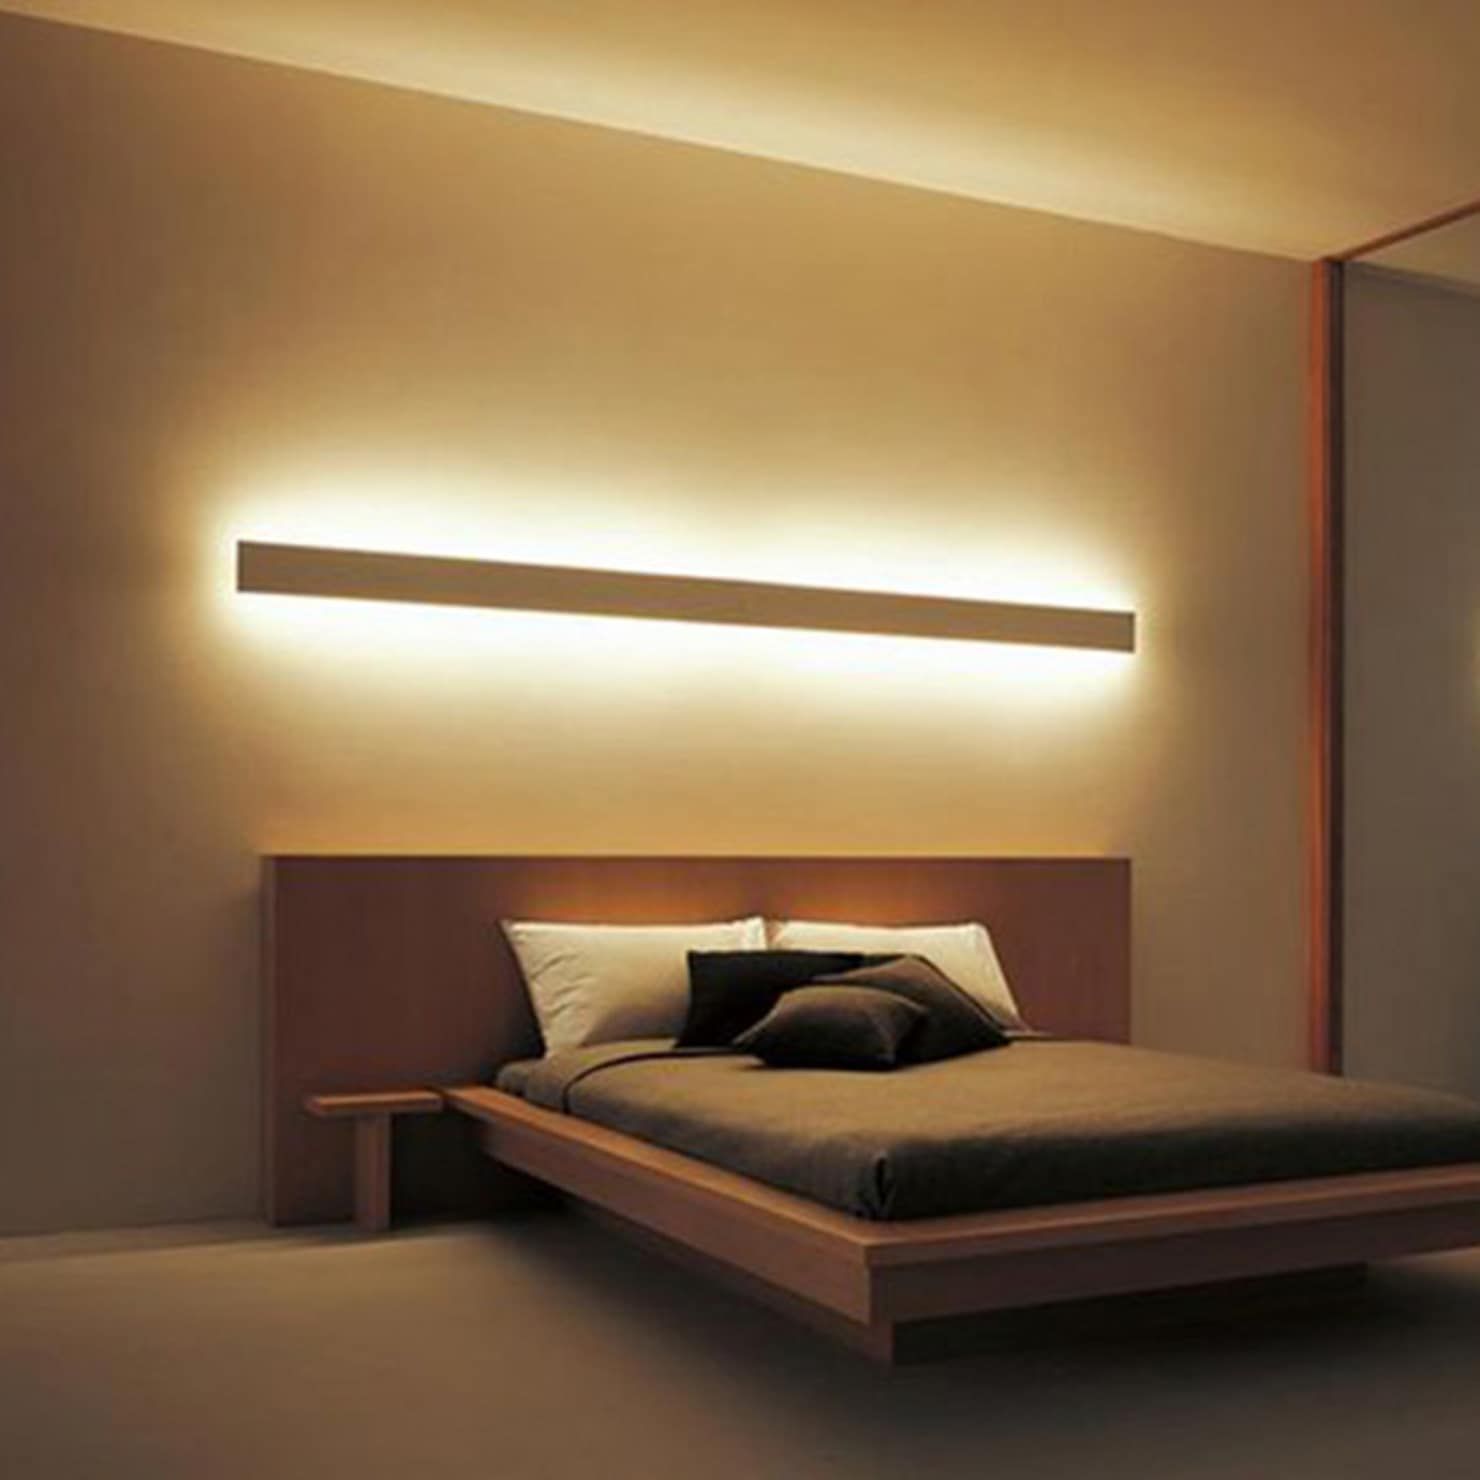 Light up your bedroom with classic
  bedroom lighting ideas